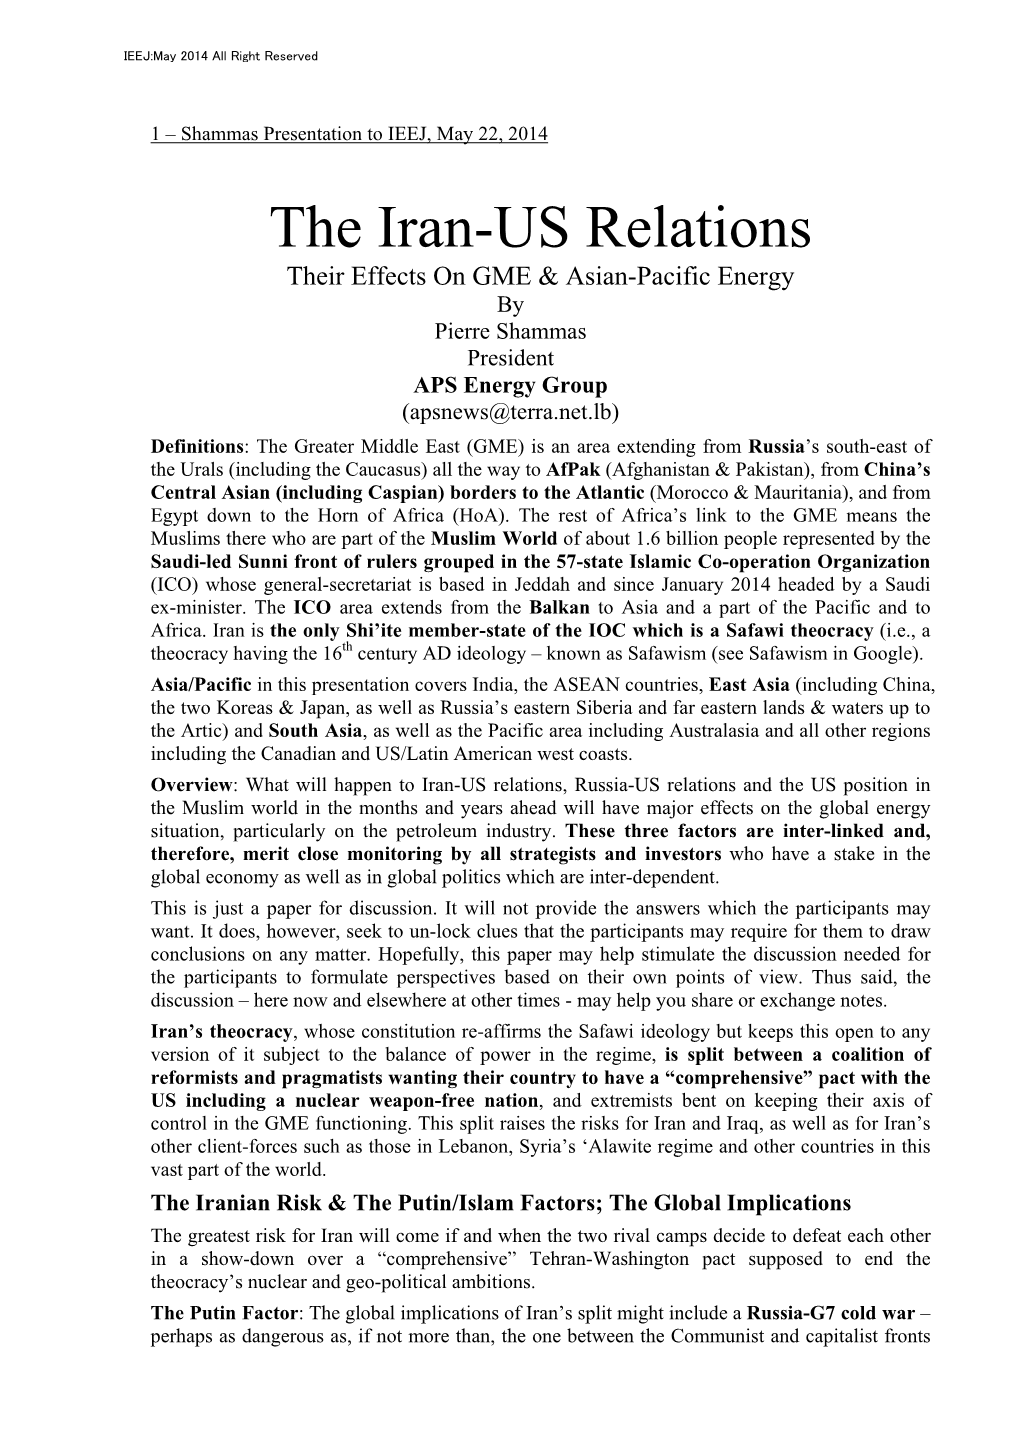 The Iran-US Relations